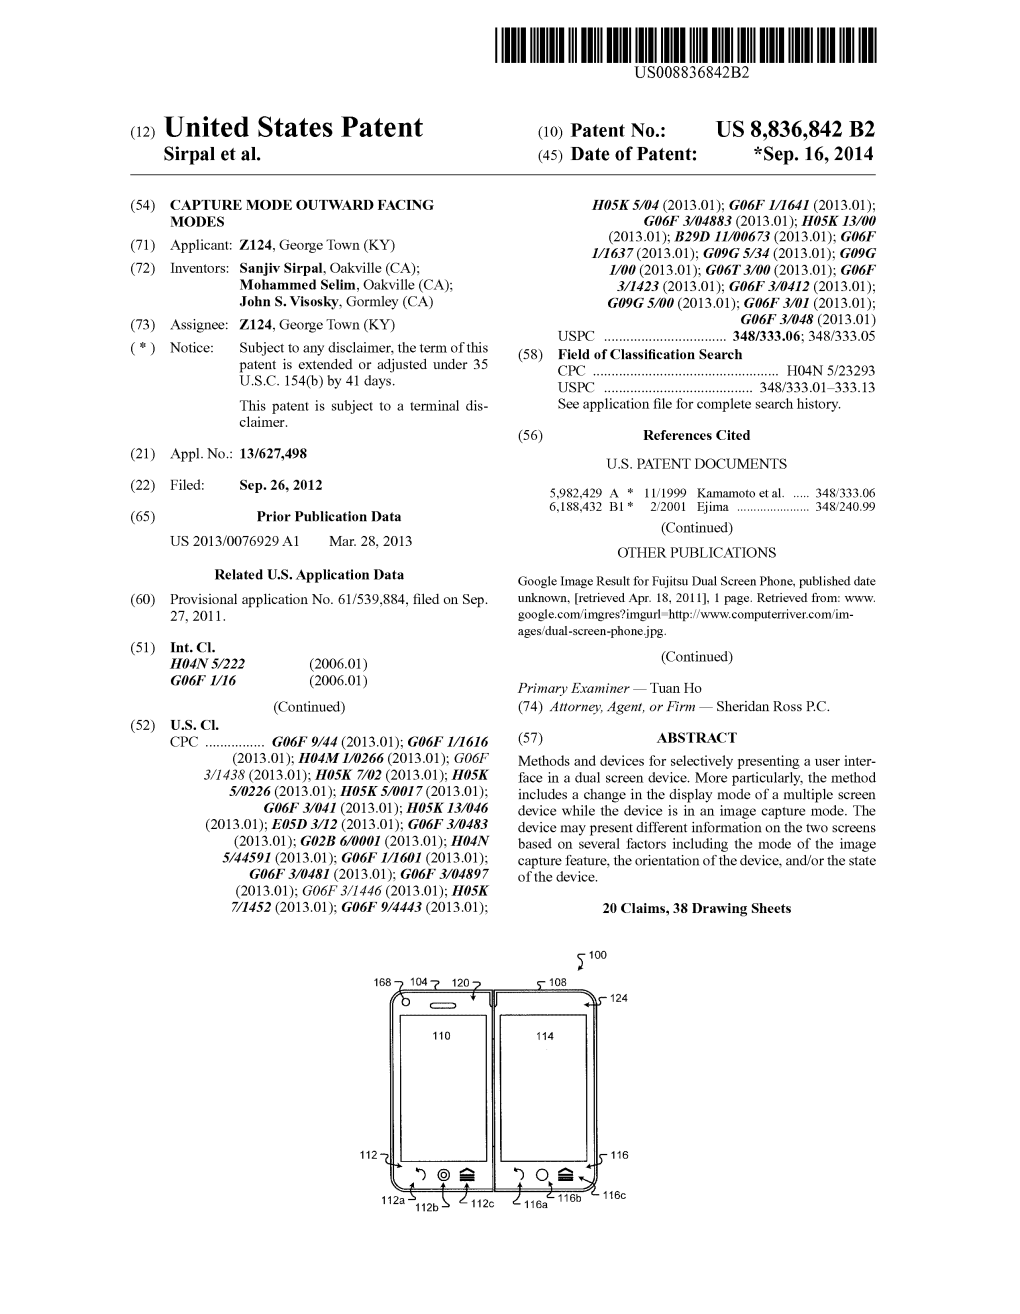 (12) United States Patent (10) Patent N0.: US 8,836,842 B2 Sirpal Et A1